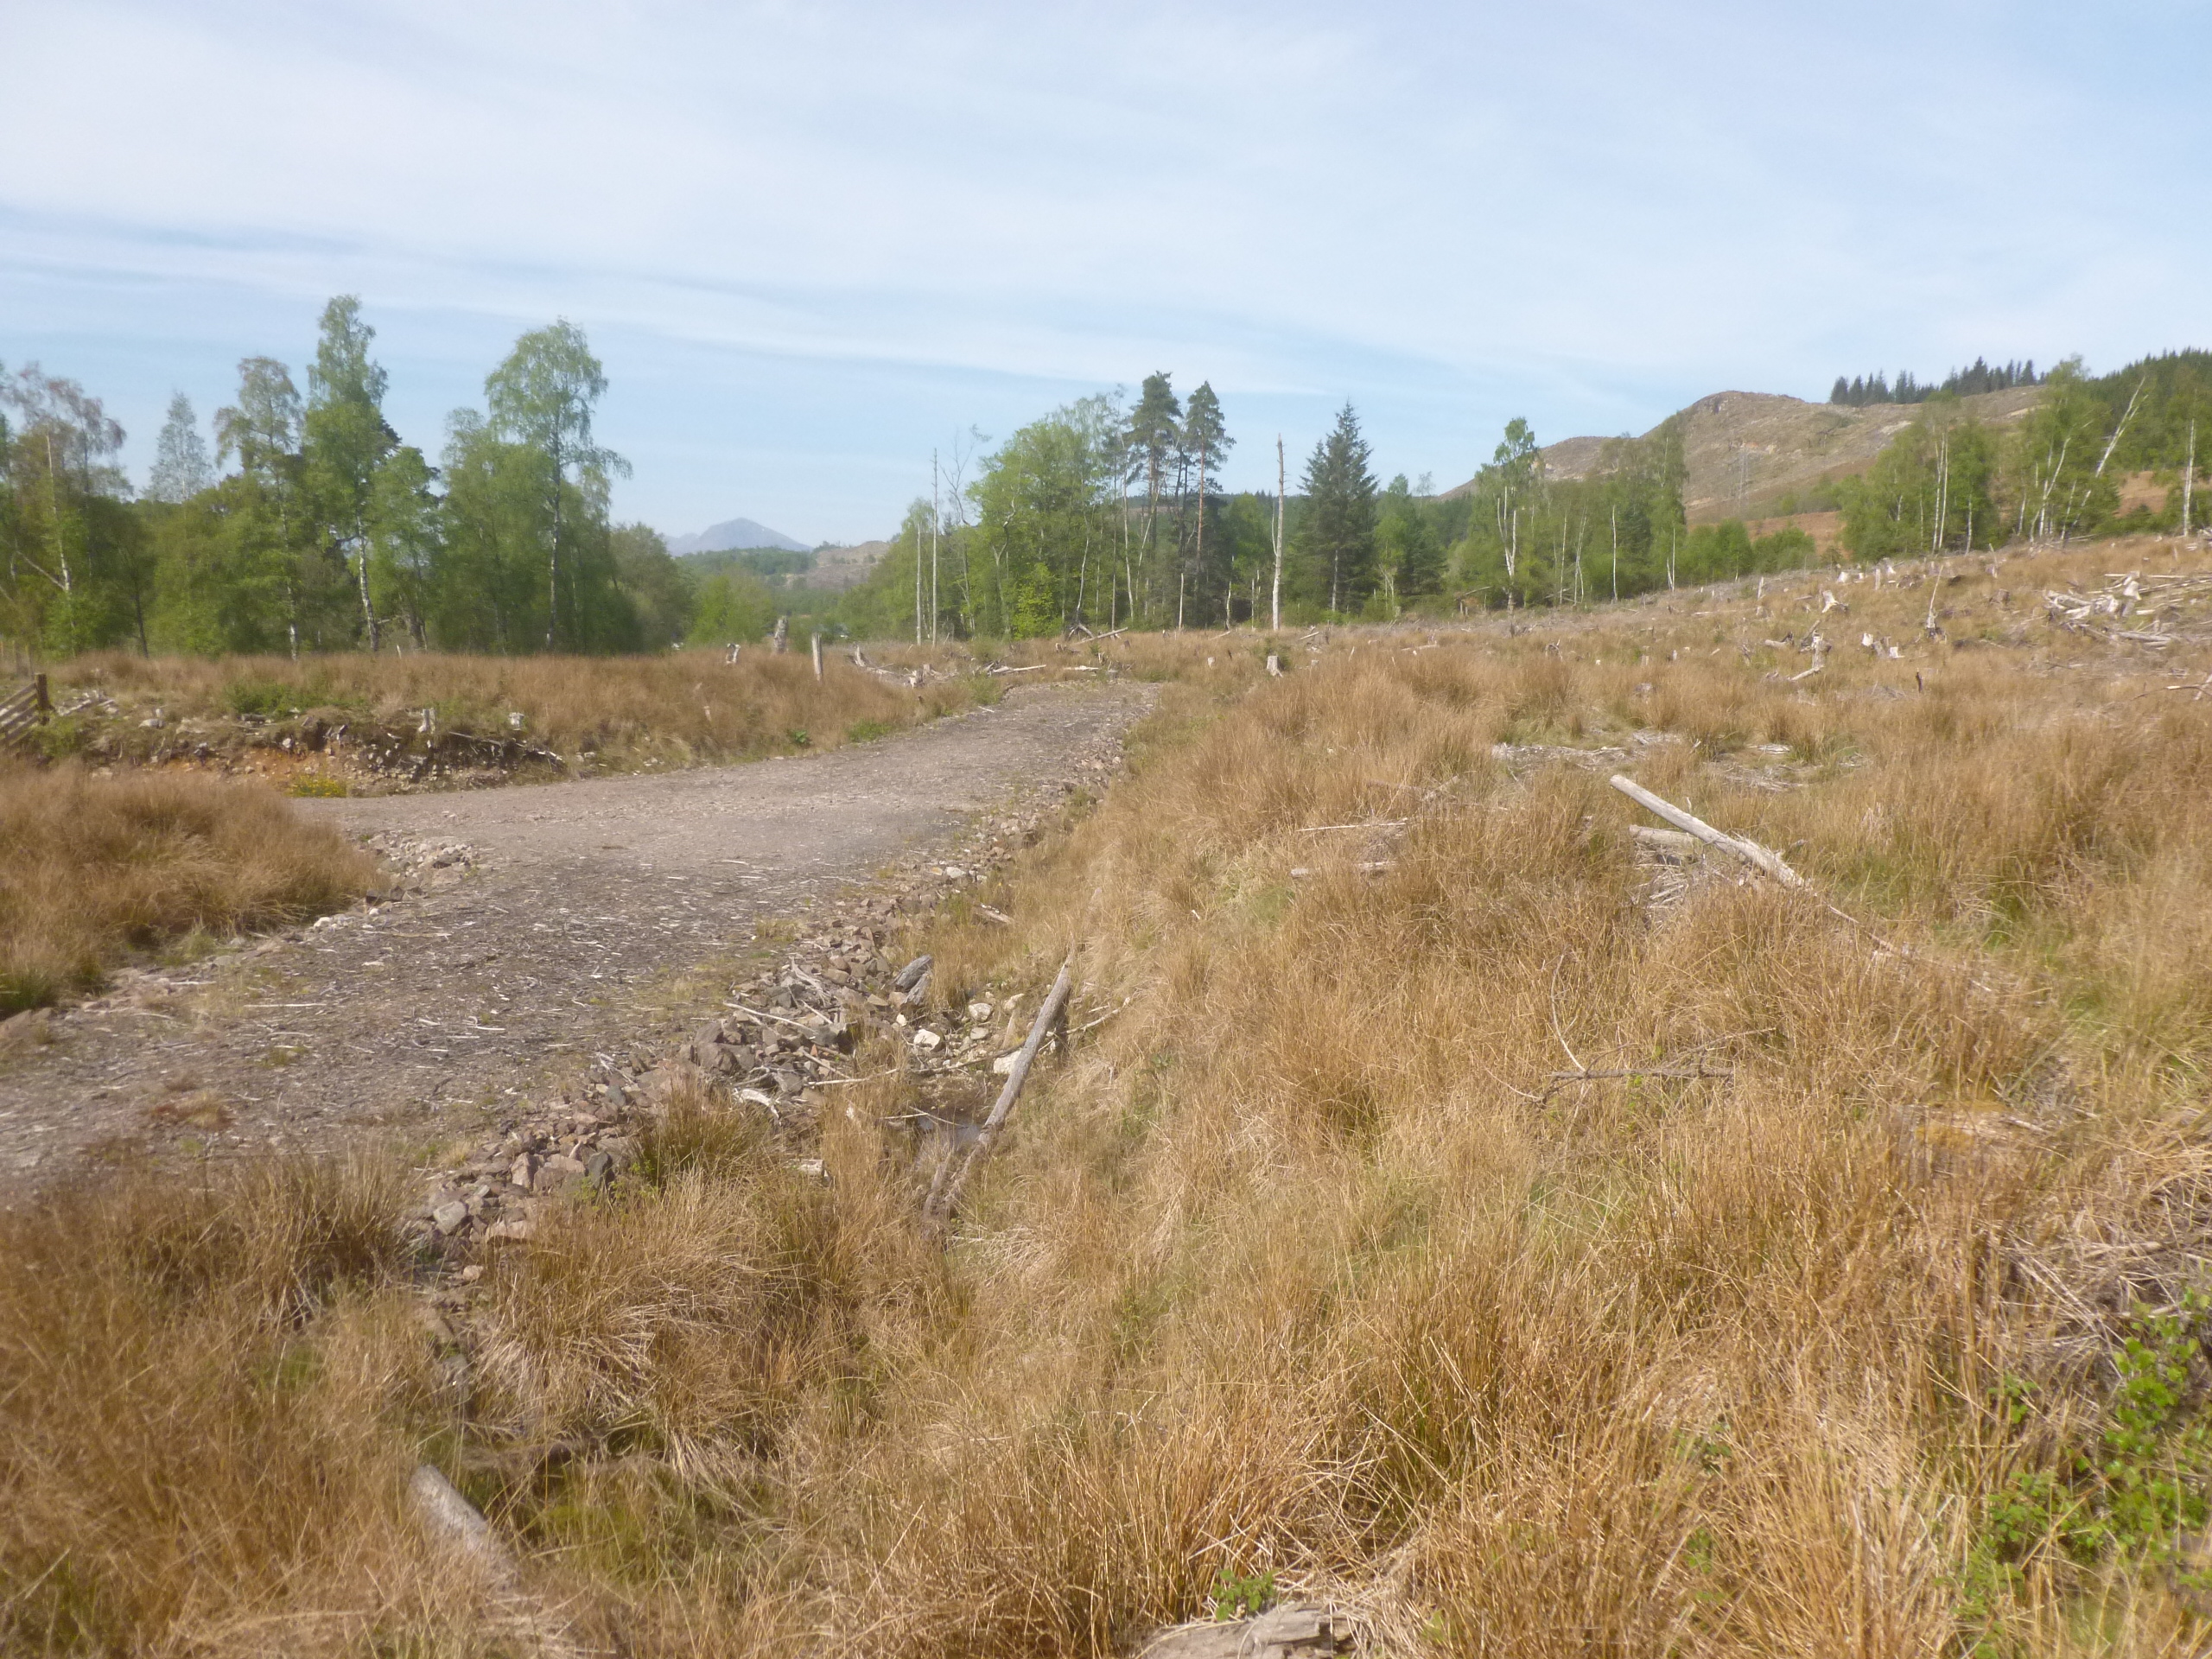 Land secured for woodland croft repopulation project in Glengarry